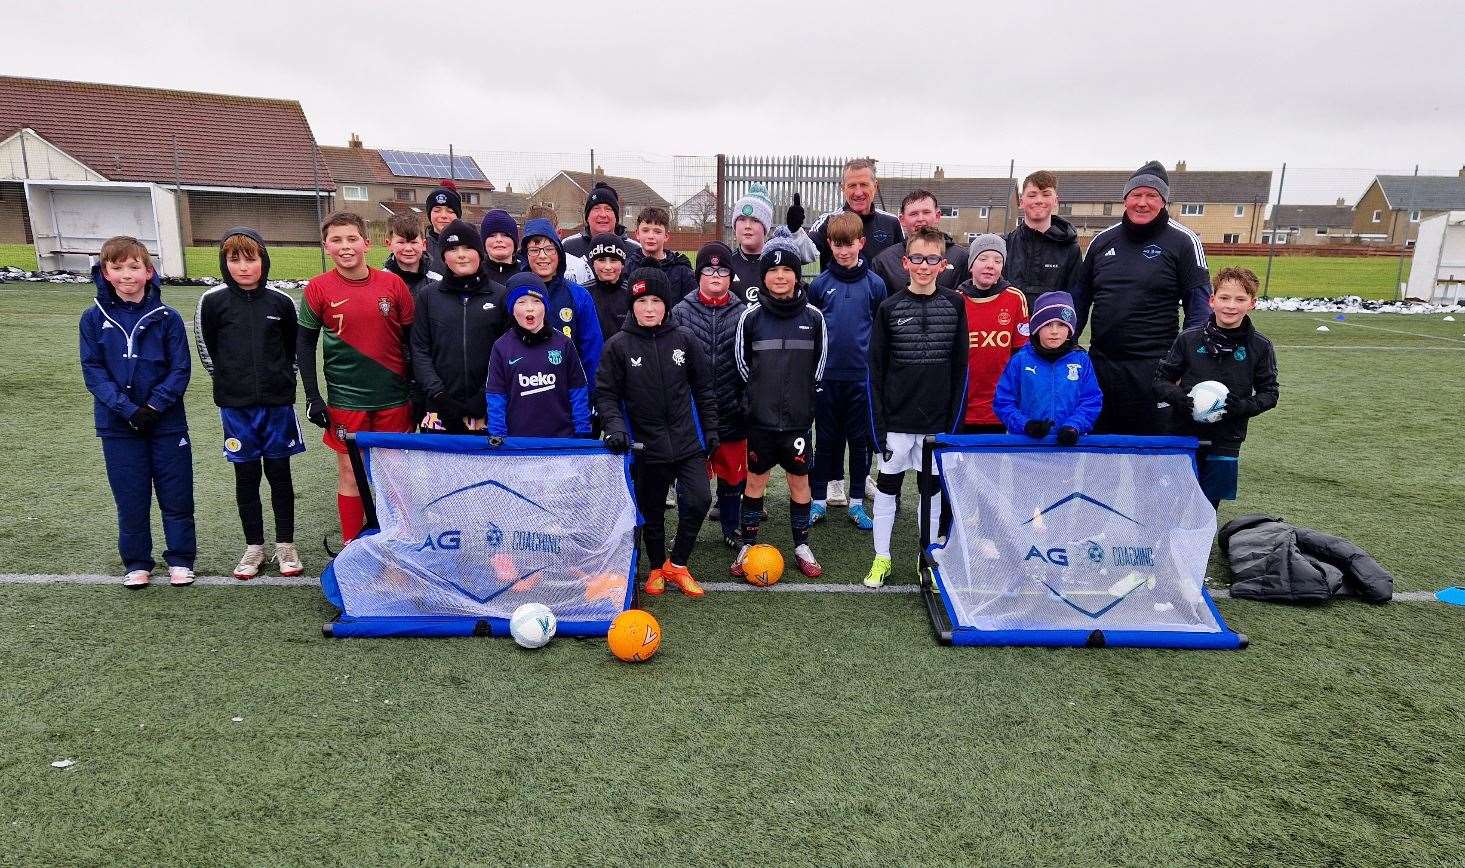 The 11-15 age group during one of last weekend's sessions run by AG Coaching with Billy Dodds, Brian Irvine and Duncan Shearer.